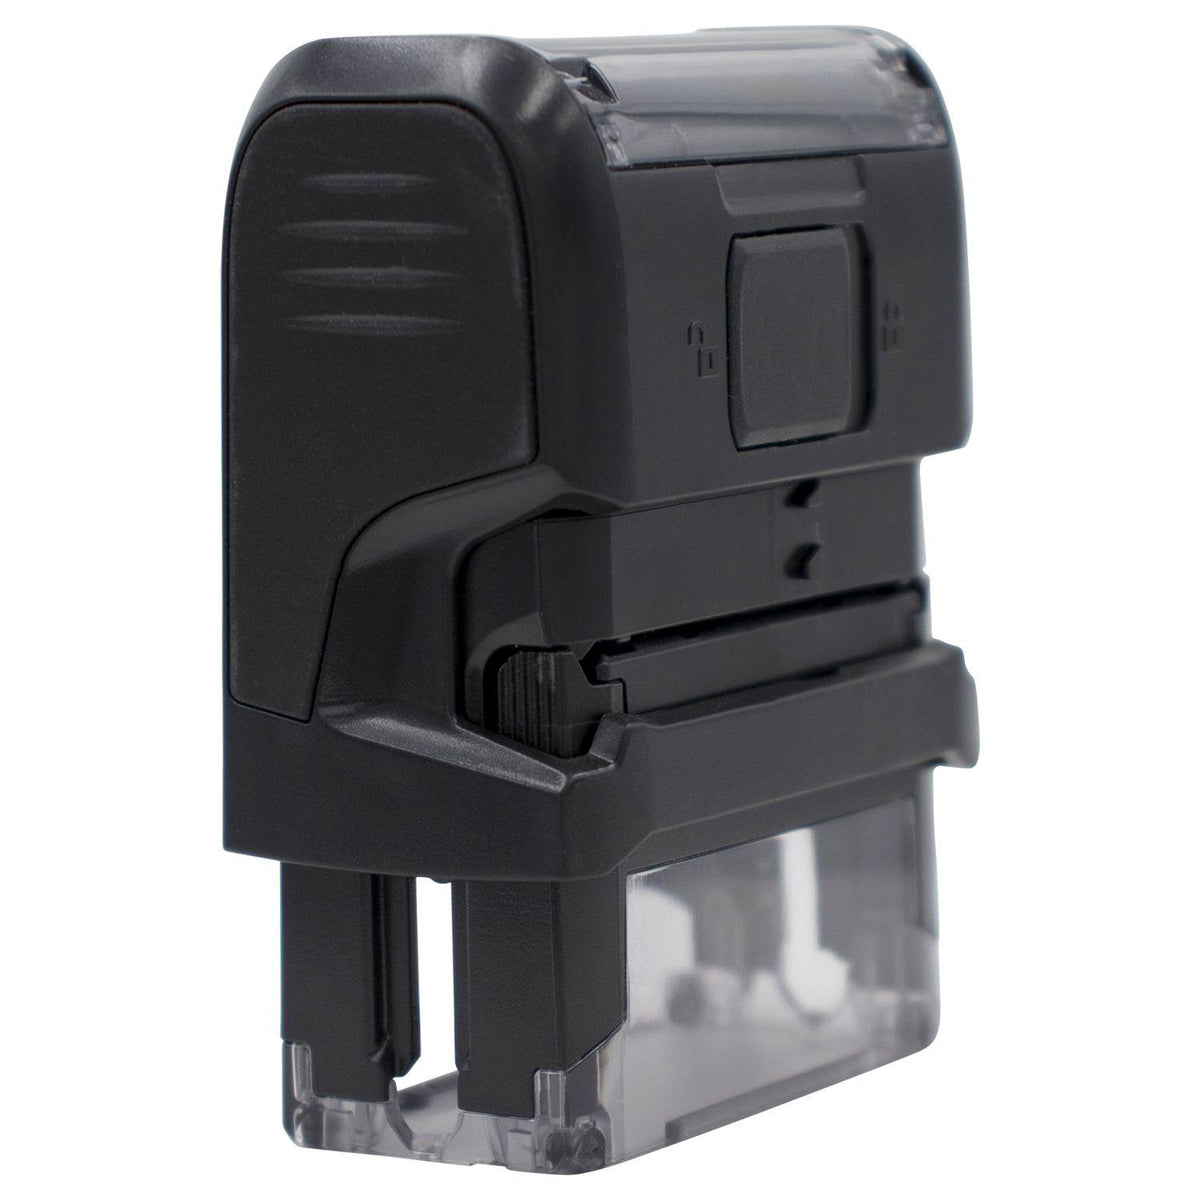 Self-Inking Surface Stamp - Engineer Seal Stamps - Brand_Trodat, Impression Size_Small, Stamp Type_Self-Inking Stamp, Type of Use_General, Type of Use_Office